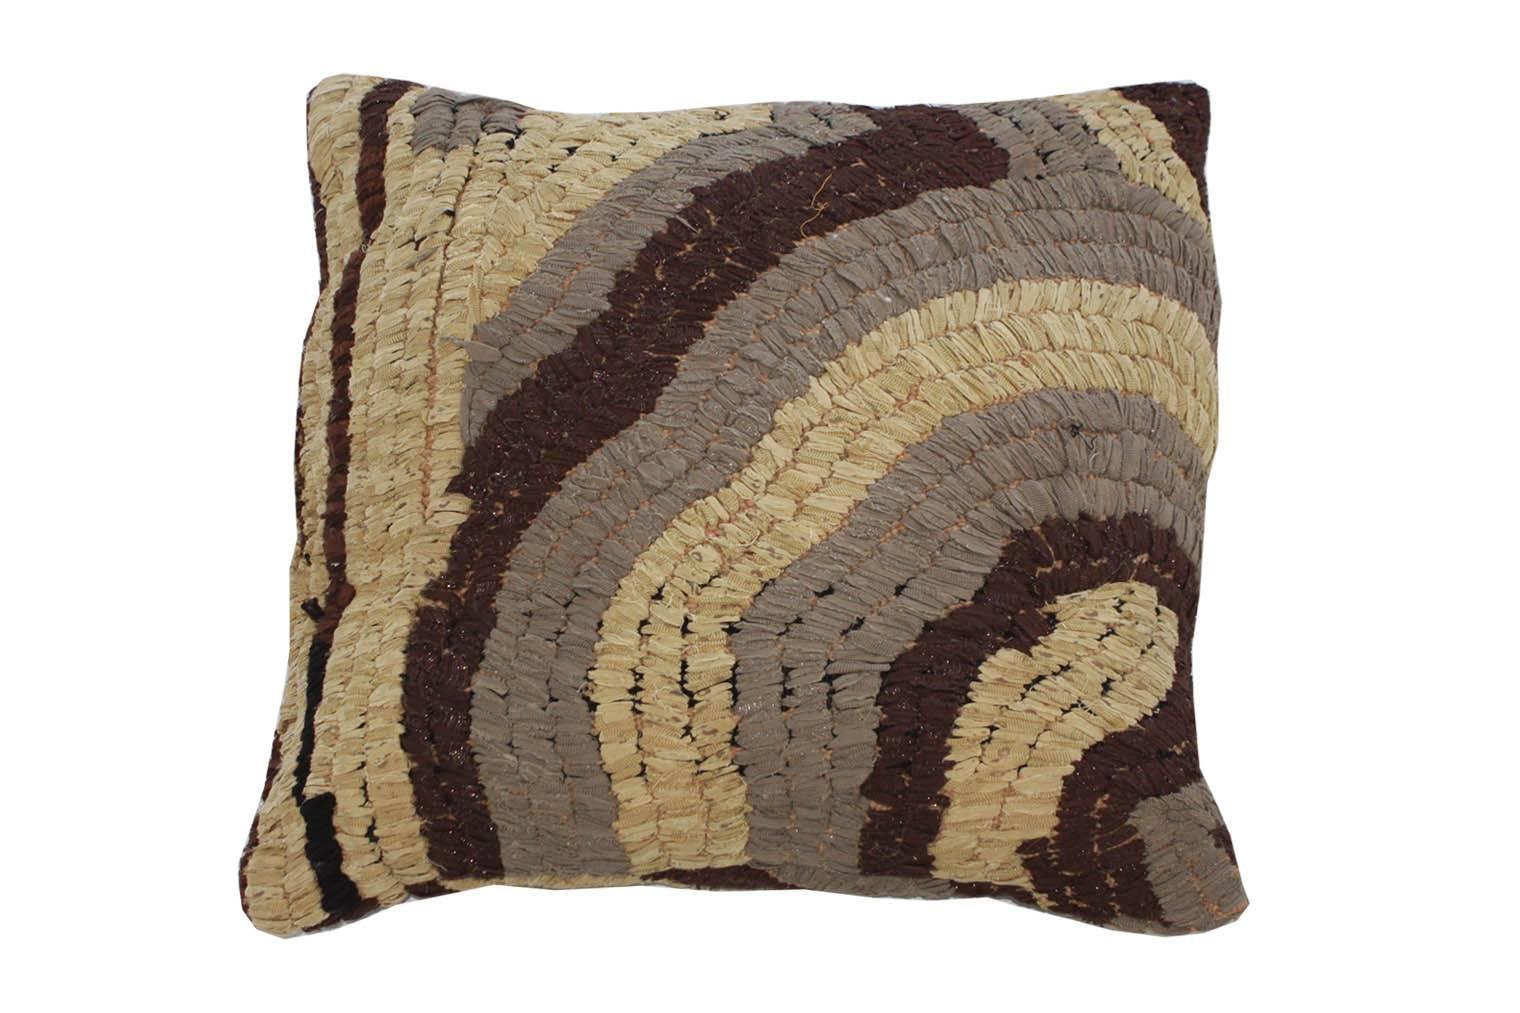 Floor pillow made of vintage Moroccan textile rug. 
This pillow is tan, taupe, brown and metallic silver.
Measures: 28" L x 27" W.